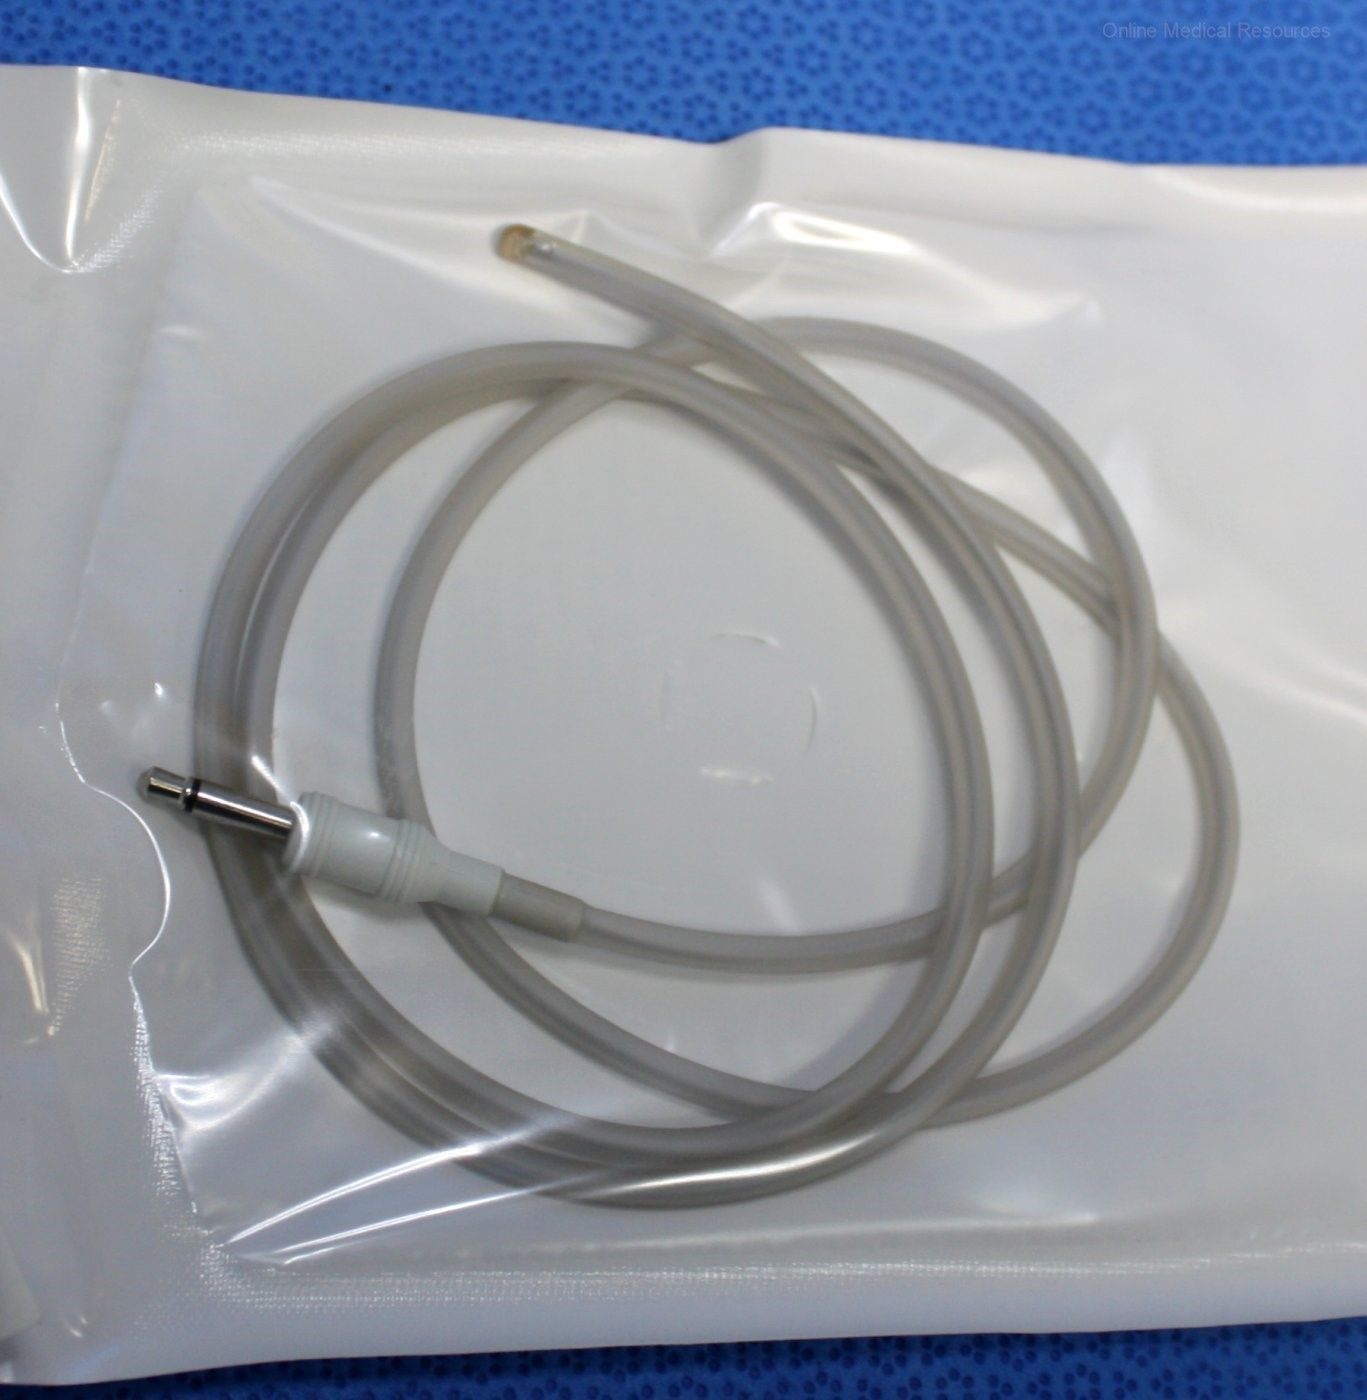 Philips 20 each Esophageal Rectal Temperature Probe 21090A Series 400 2017-06 DIAGNOSTIC ULTRASOUND MACHINES FOR SALE